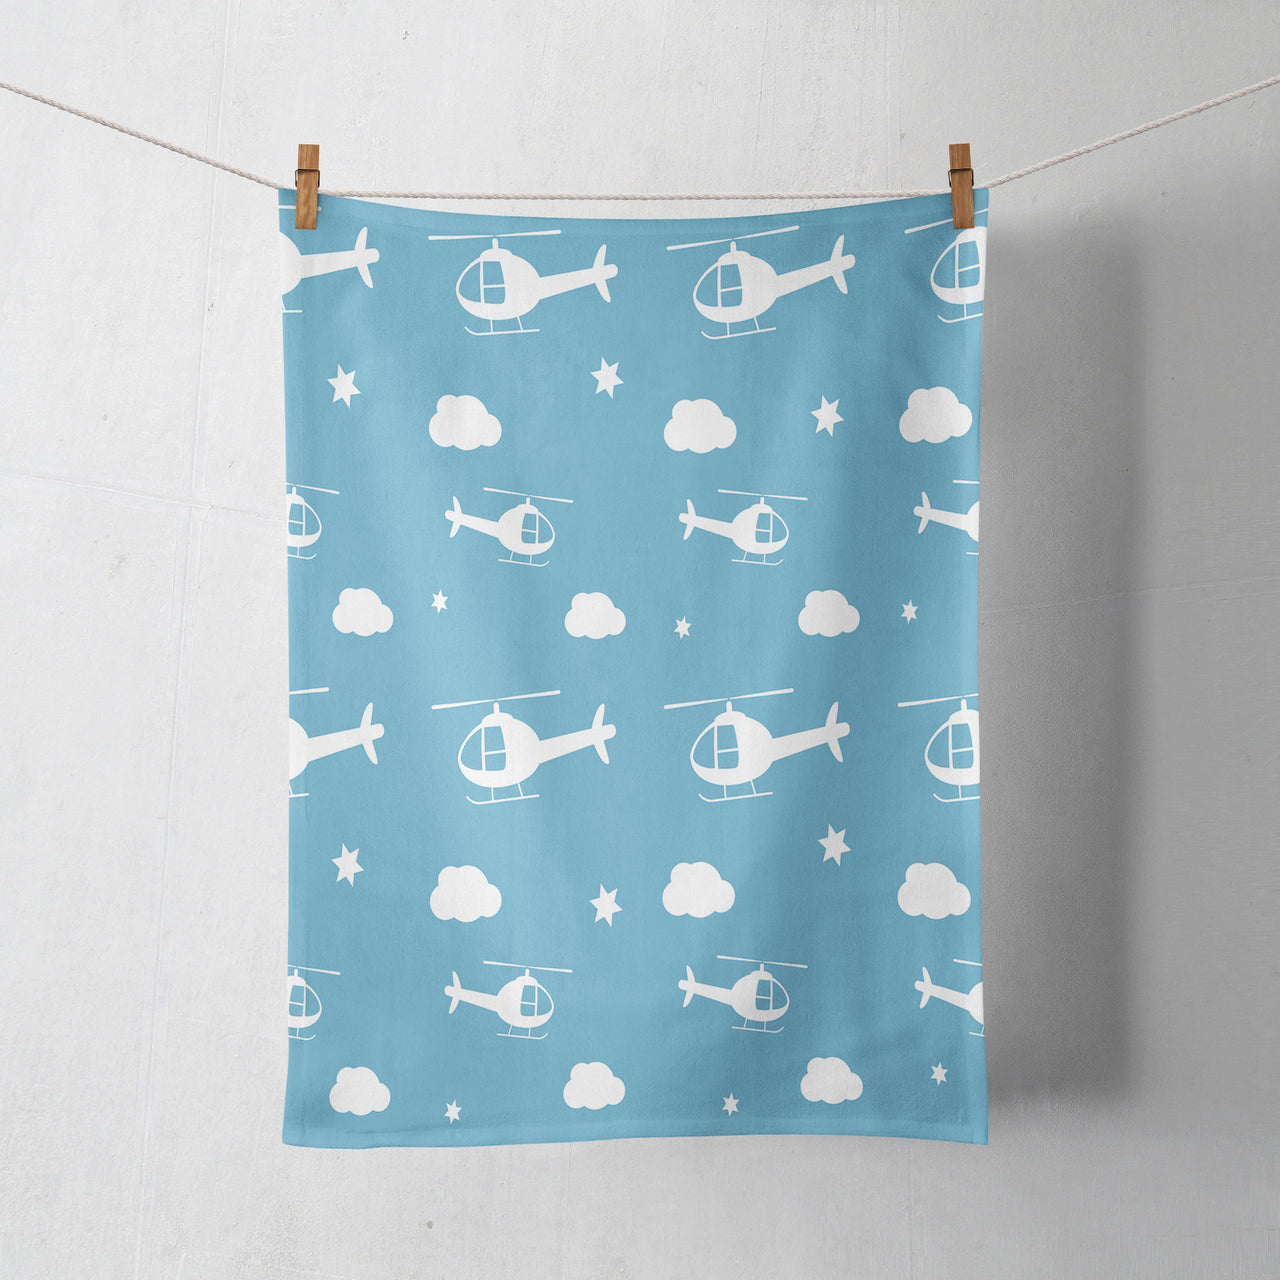 Helicopters & Clouds Designed Towels